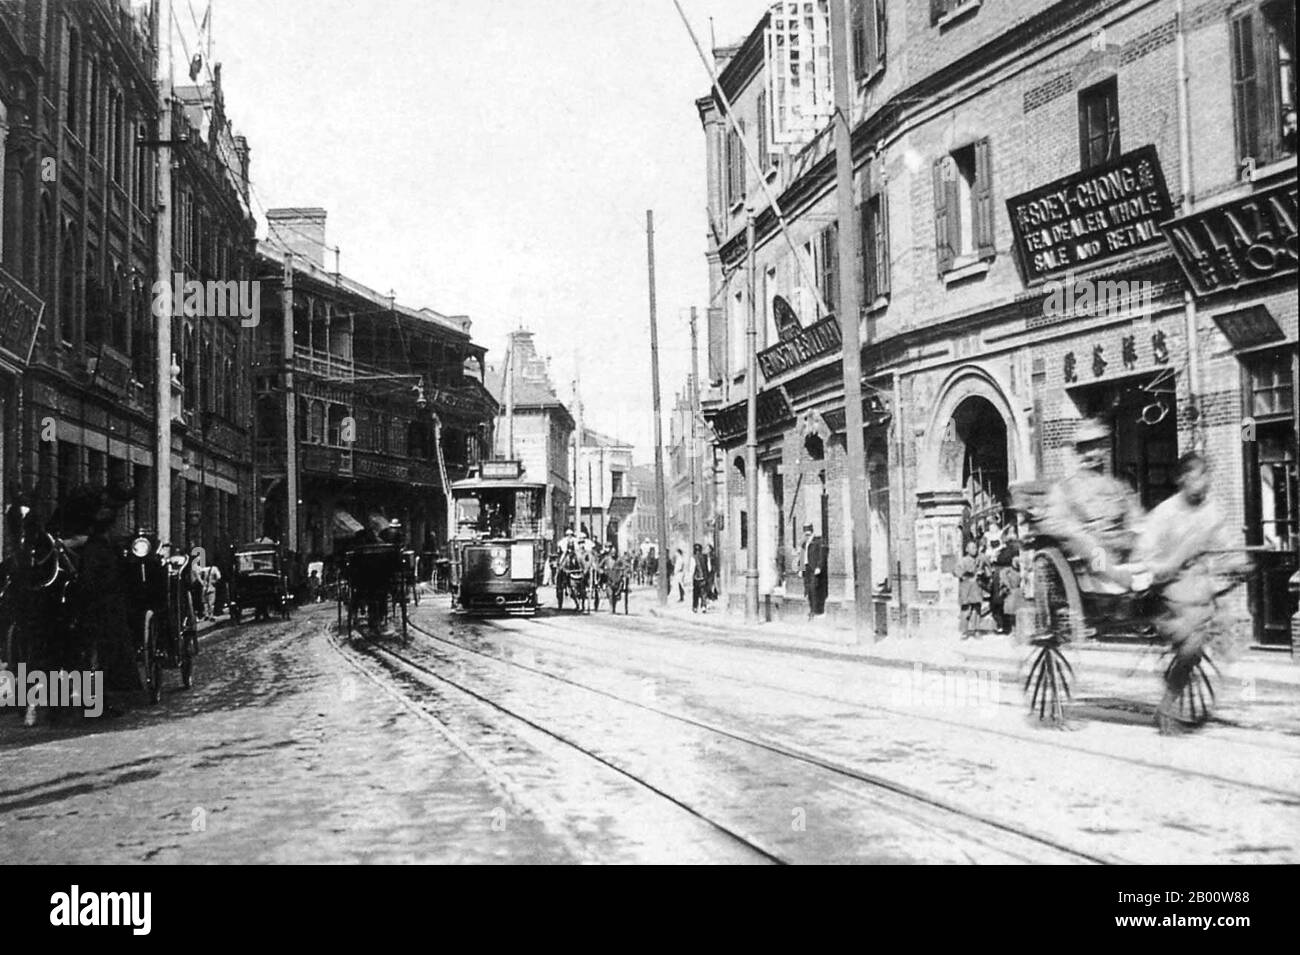 China: Shanghai's Nanjing Road with tram, rickshaw and shops c.1910.  International attention to Shanghai grew in the 19th century due to its economic and trade potential at the Yangtze River. During the First Opium War (1839–1842), British forces temporarily held the city. The war ended with the 1842 Treaty of Nanjing, opening Shanghai and other ports to international trade.  In 1863, the British settlement, located to the south of Suzhou creek (Huangpu district), and the American settlement, to the north of Suzhou creek (Hongkou district), joined in order to form the International Settlement Stock Photo